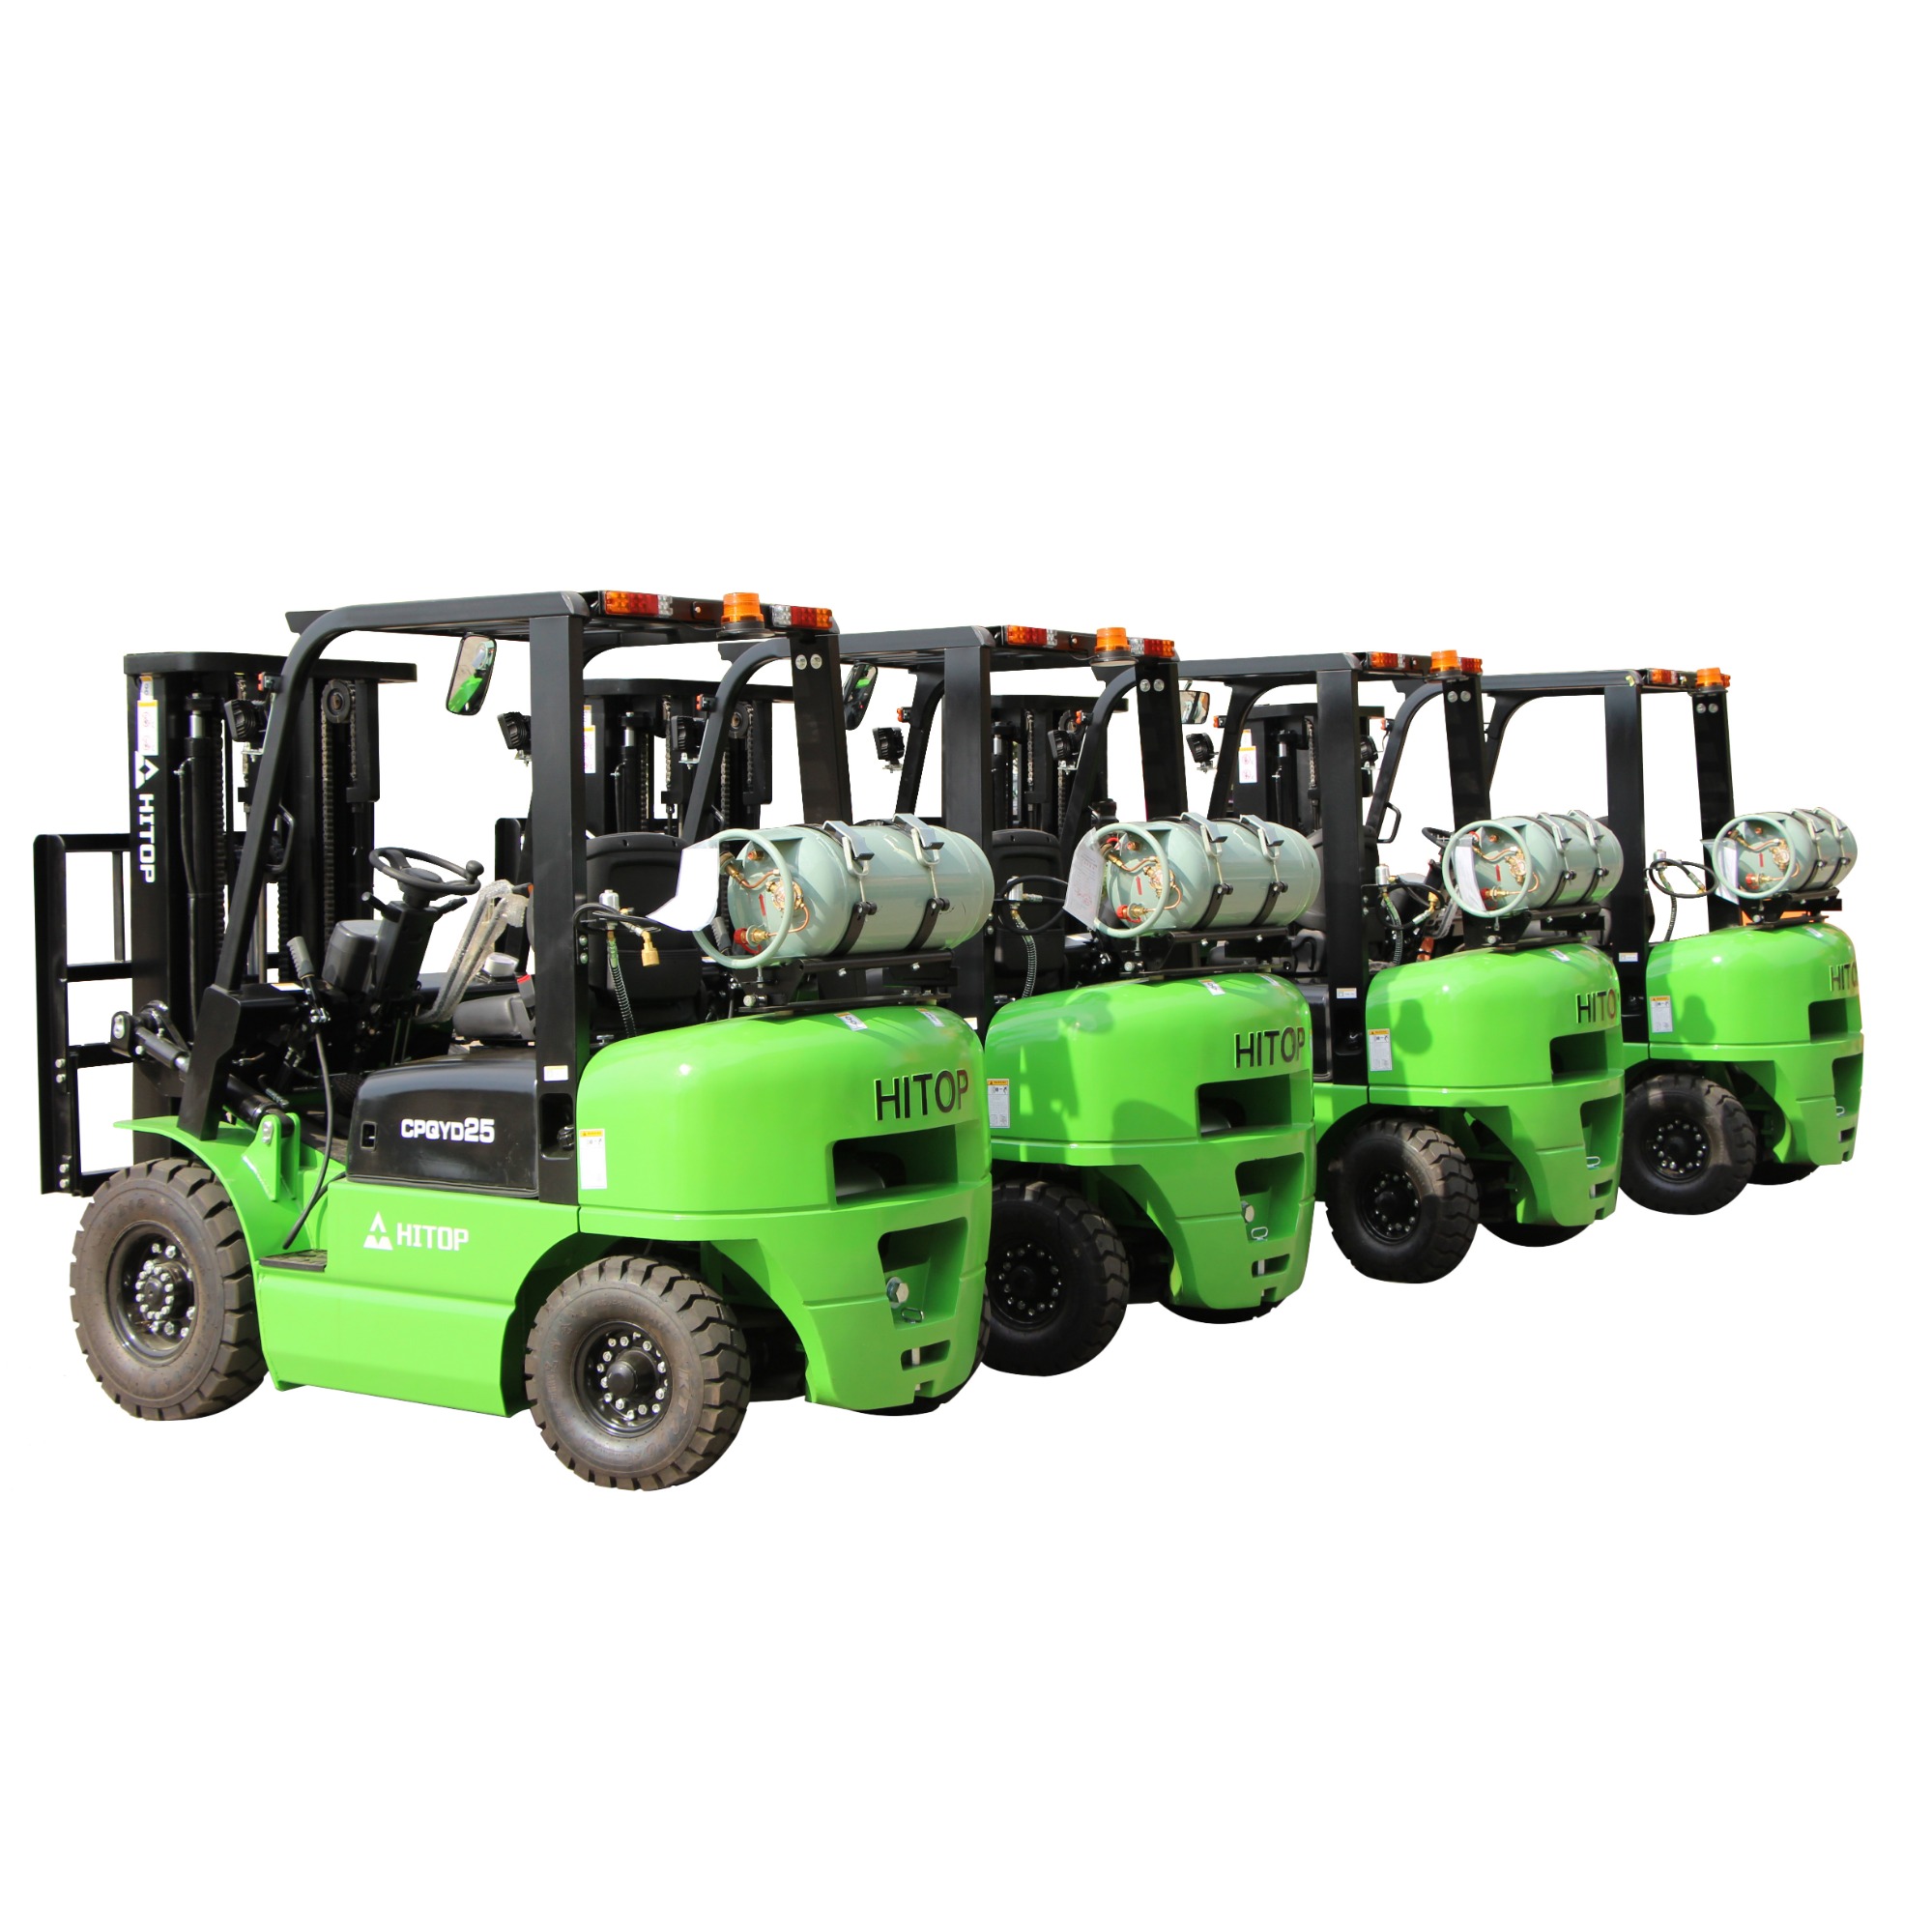 Electric forklift routine maintenance test items